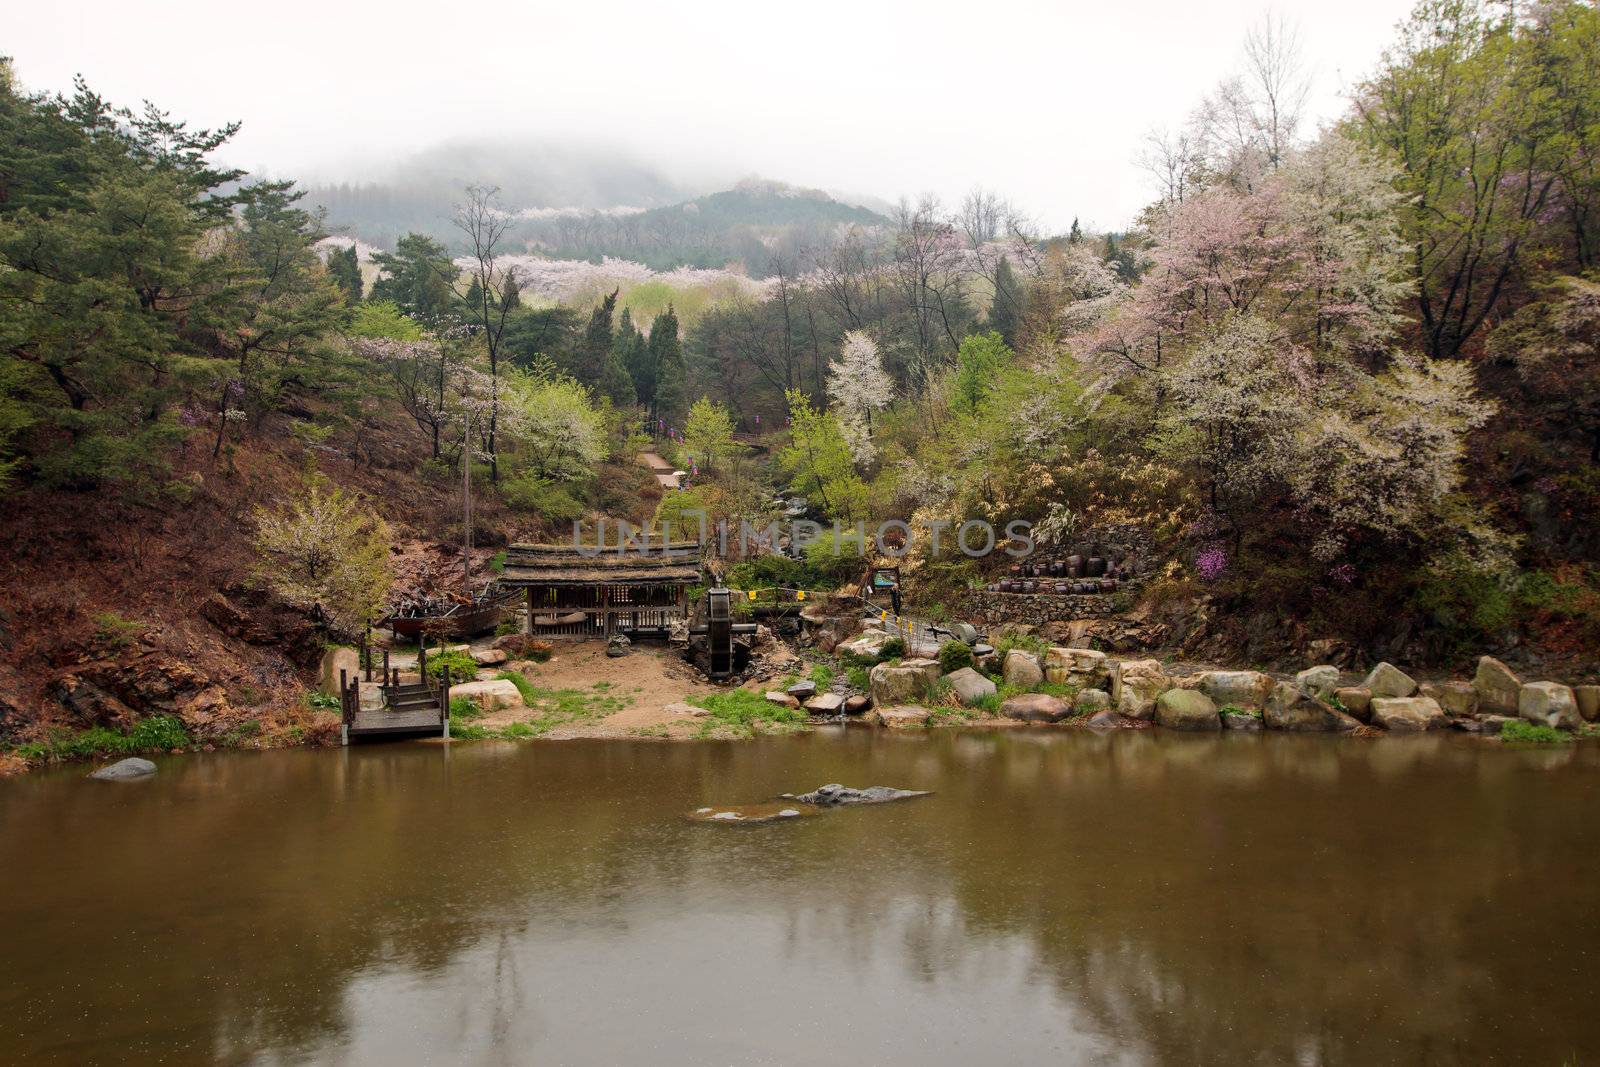 Cherry blossom in Korean mountains at a riverside in a rainy day